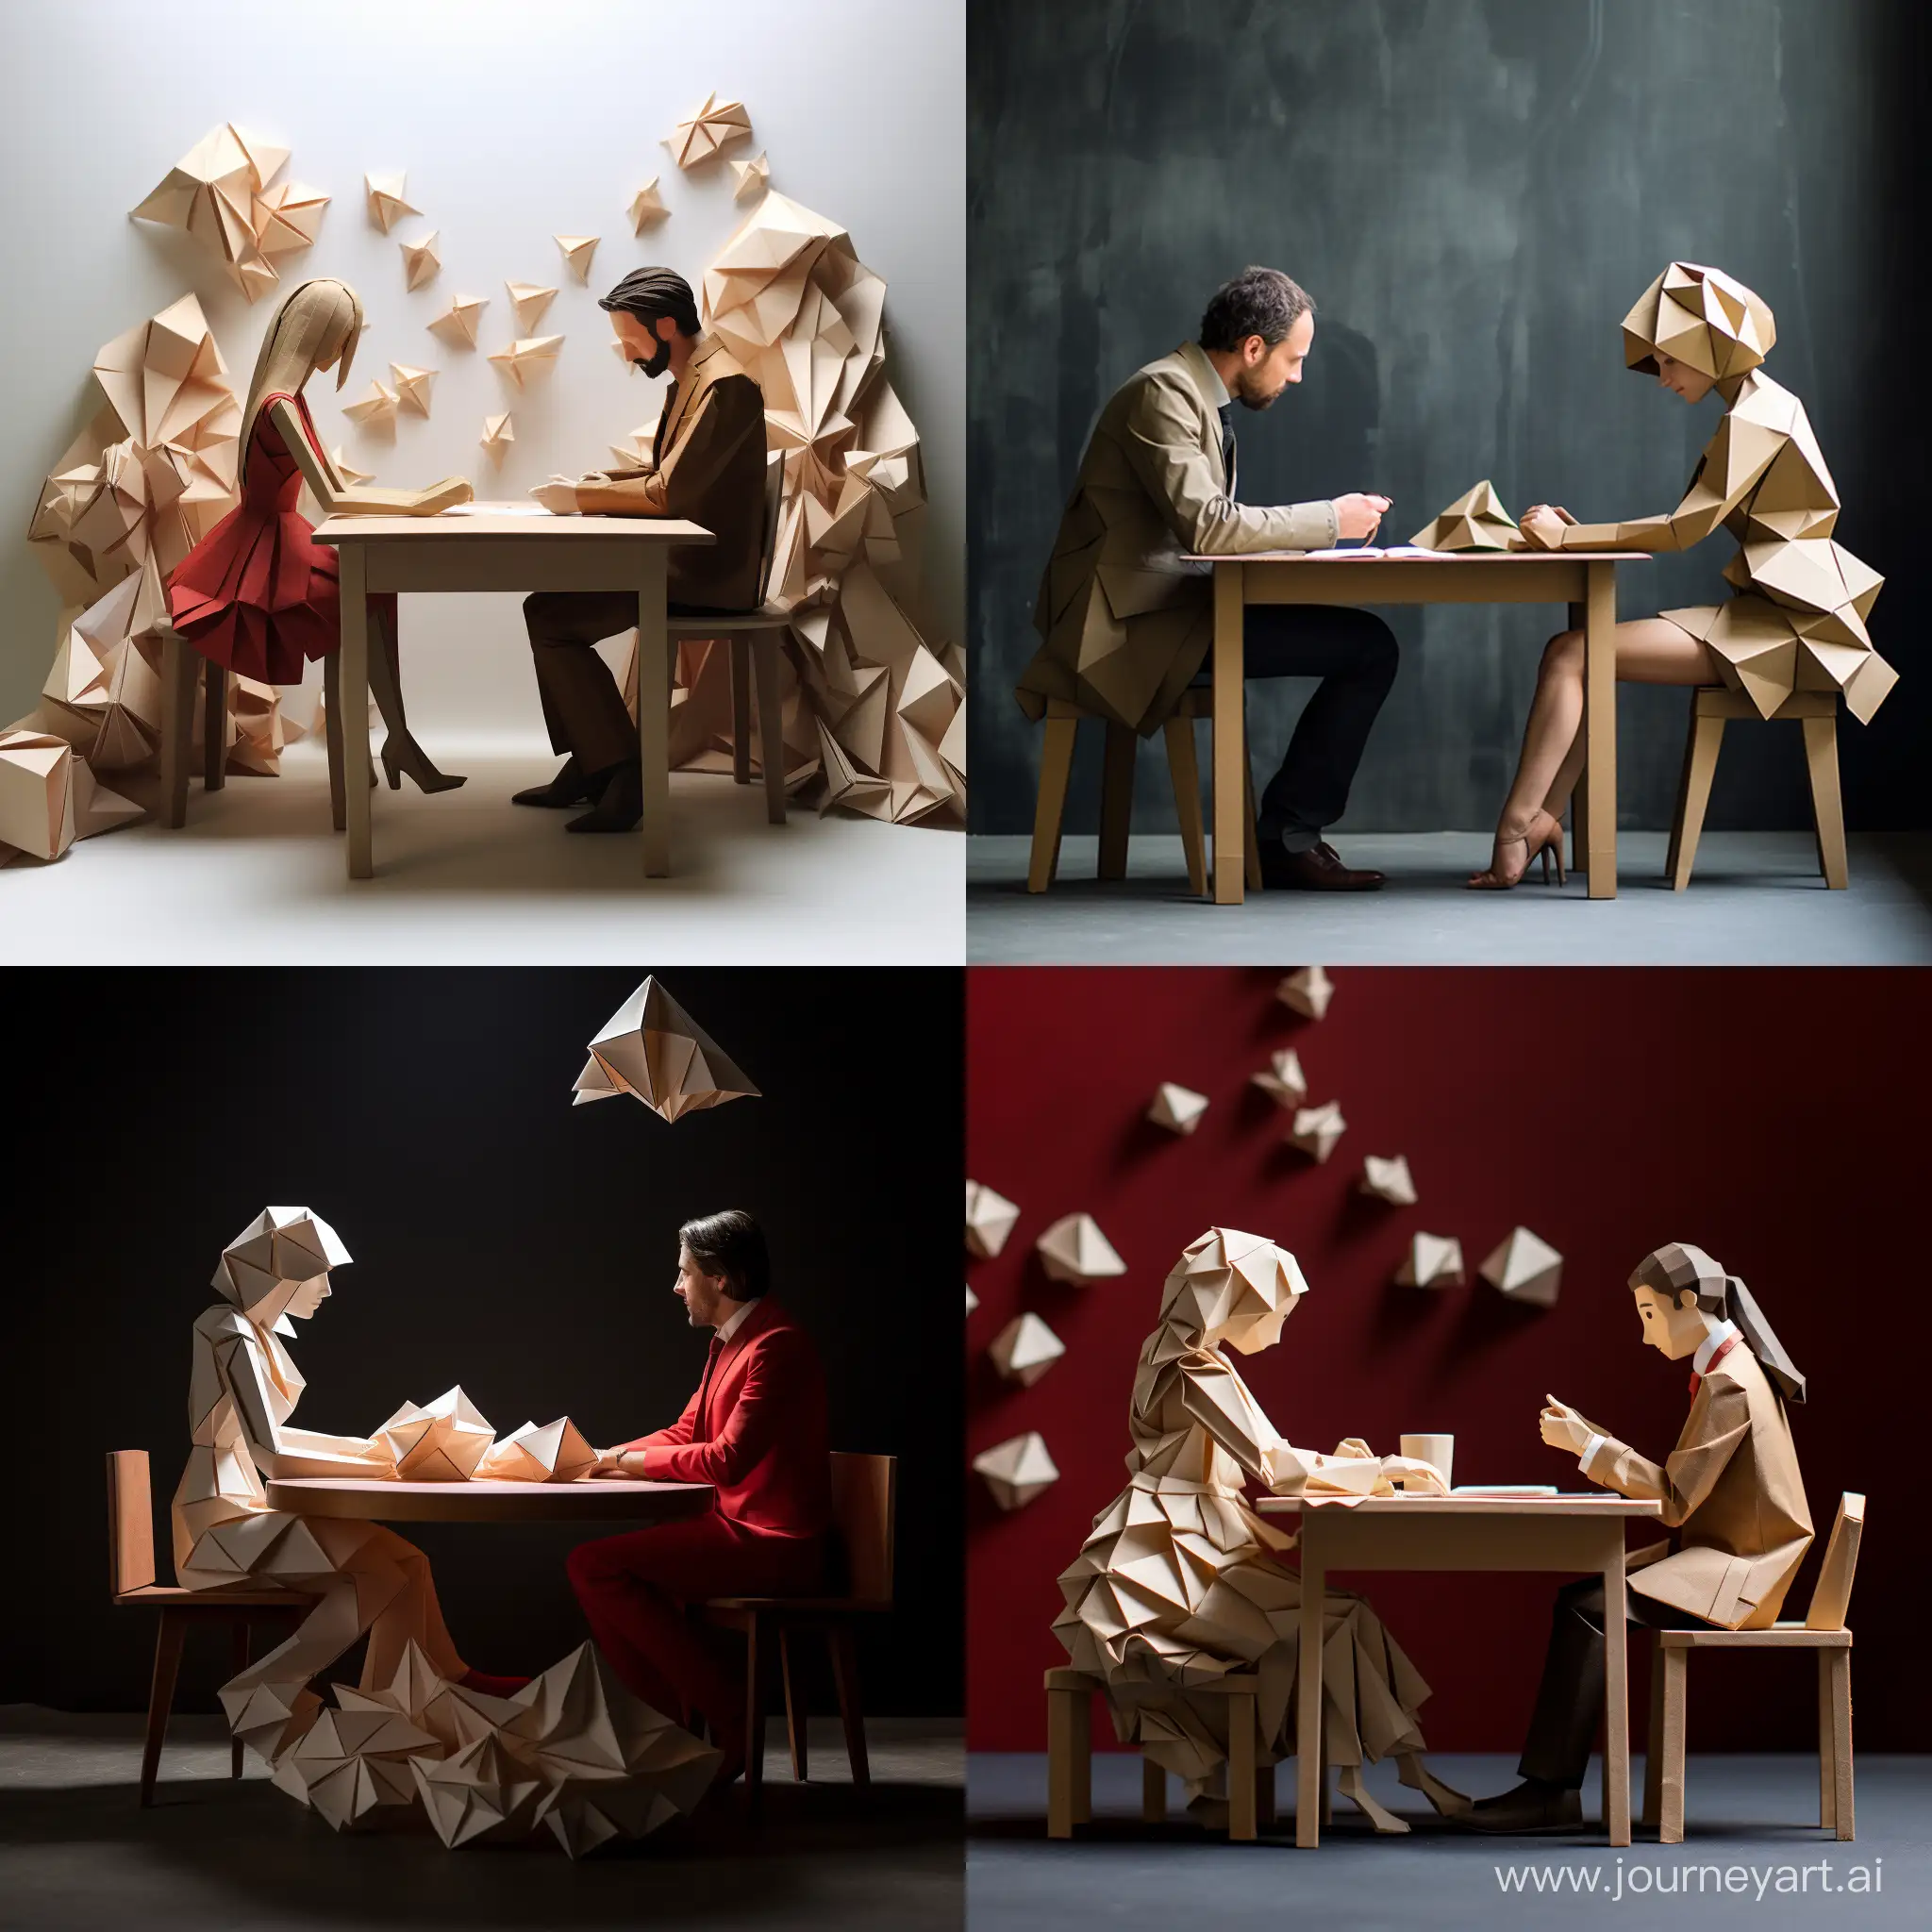 Conversation-at-Origami-Desk-Man-and-Woman-Engaged-in-Discussion